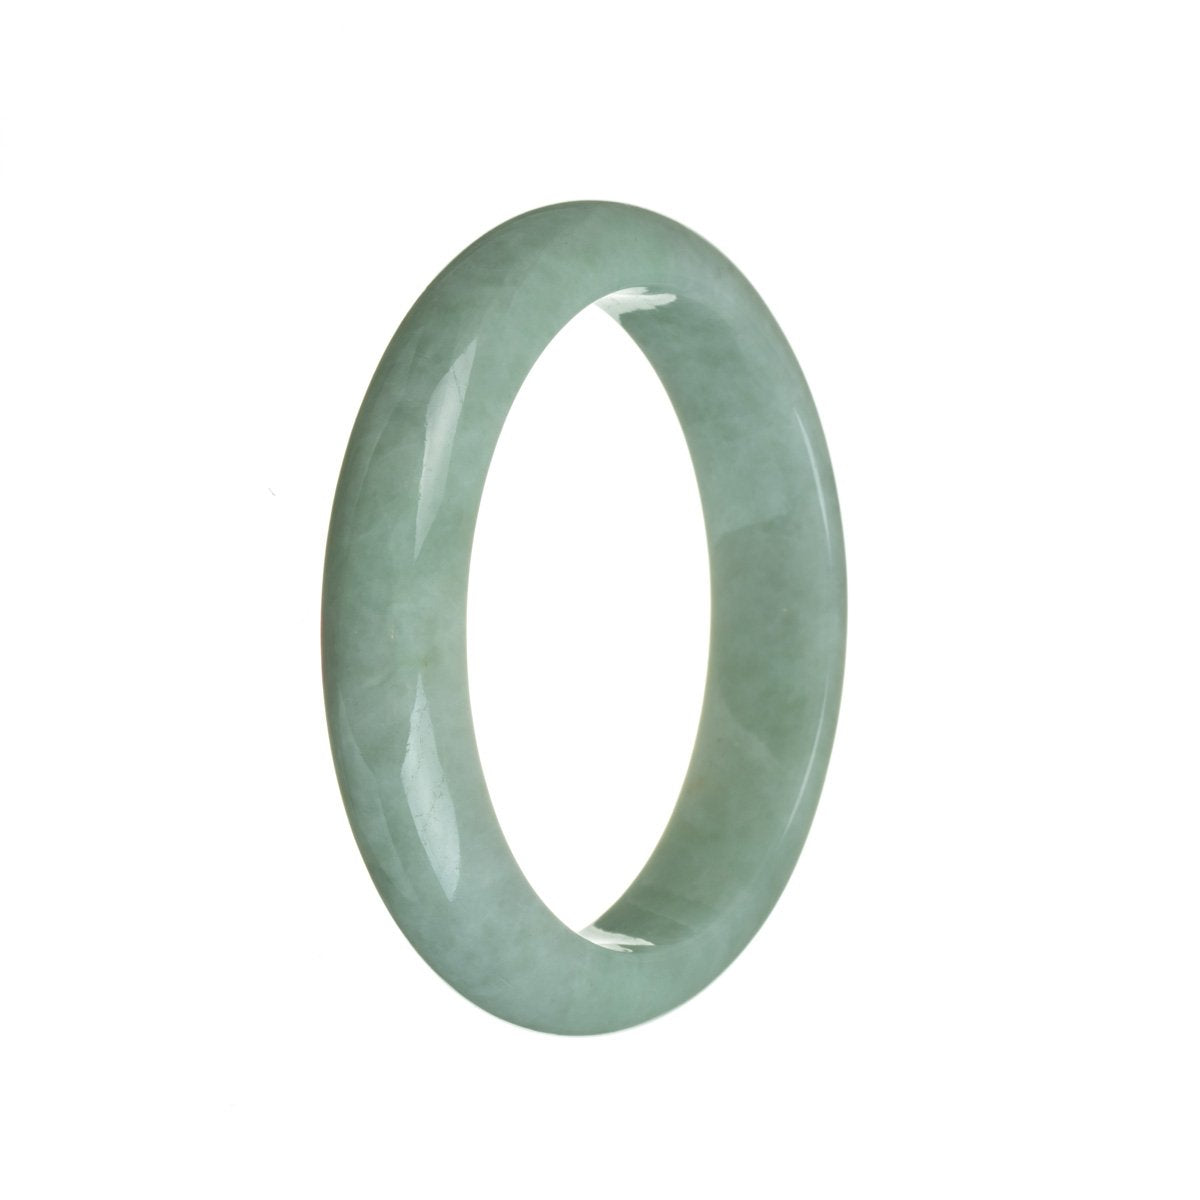 A close-up of a green jadeite jade bangle, with a smooth and semi-round shape, measuring 59mm in diameter. It is a genuine Type A jade, known for its vibrant green color and high quality. Perfect for adding a touch of elegance to any outfit.